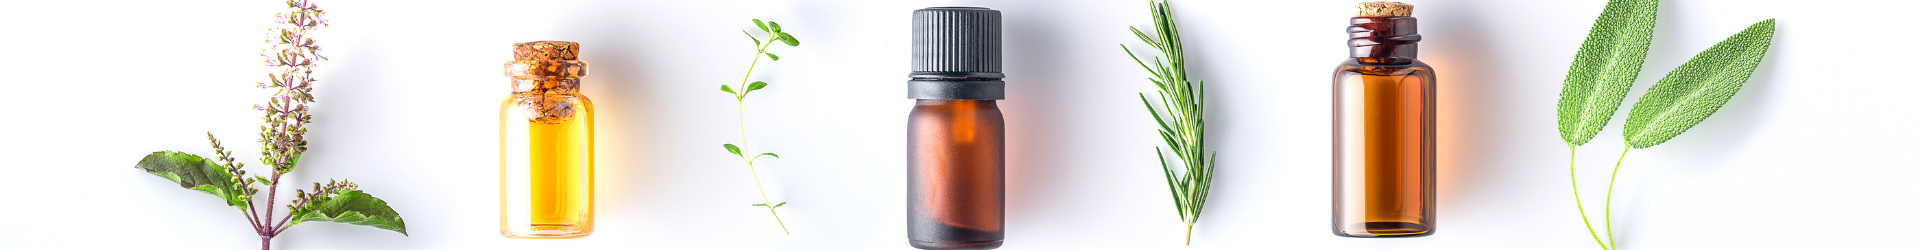 Photo of essential oil bottles